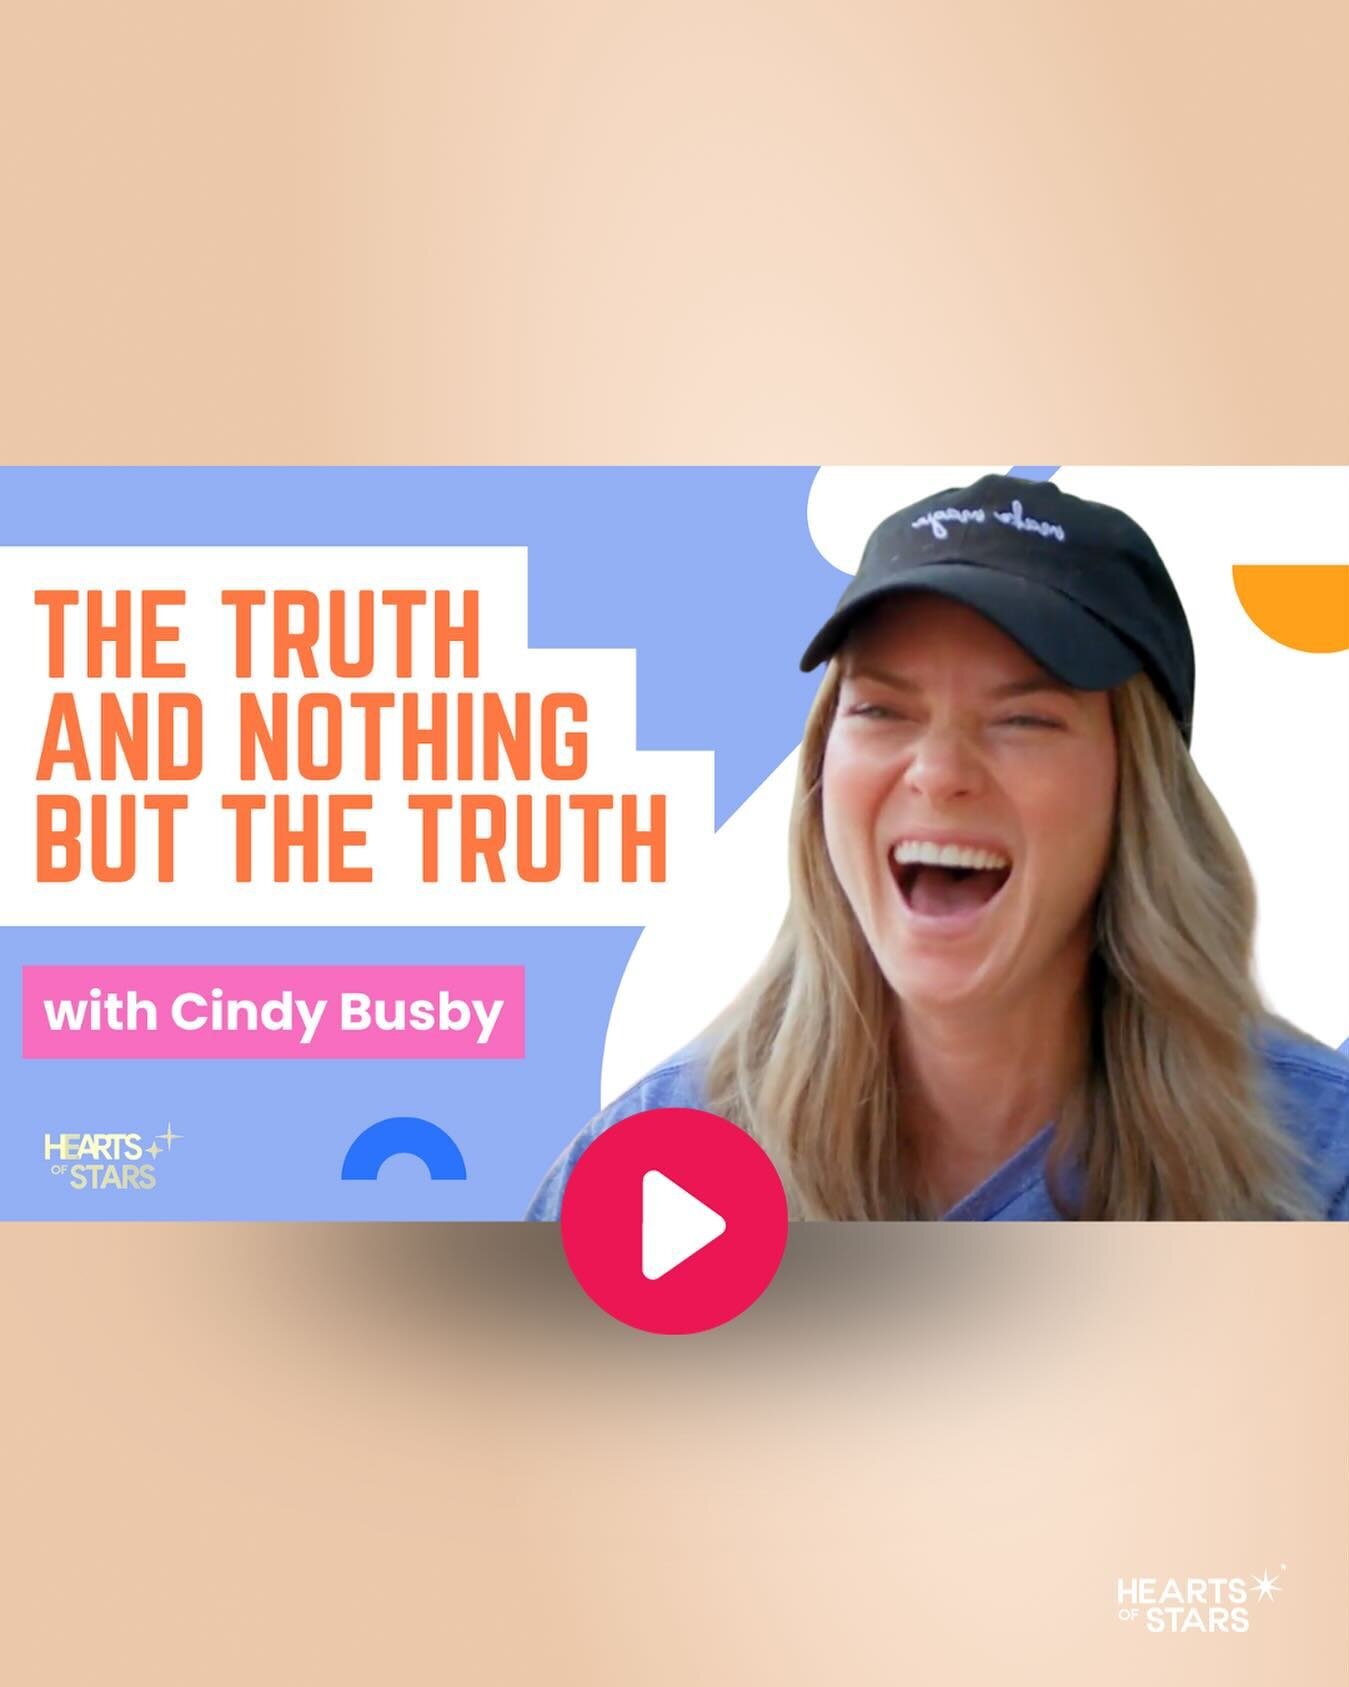 Need a little dose of Cindy Busby fun to keep the excitement going before our big virtual event on Saturday? We've gotcha! 🎉

Check out our YouTube channel for some awesome mini-episodes starring Cindy. It's like a sneak peek of the fun we'll have t